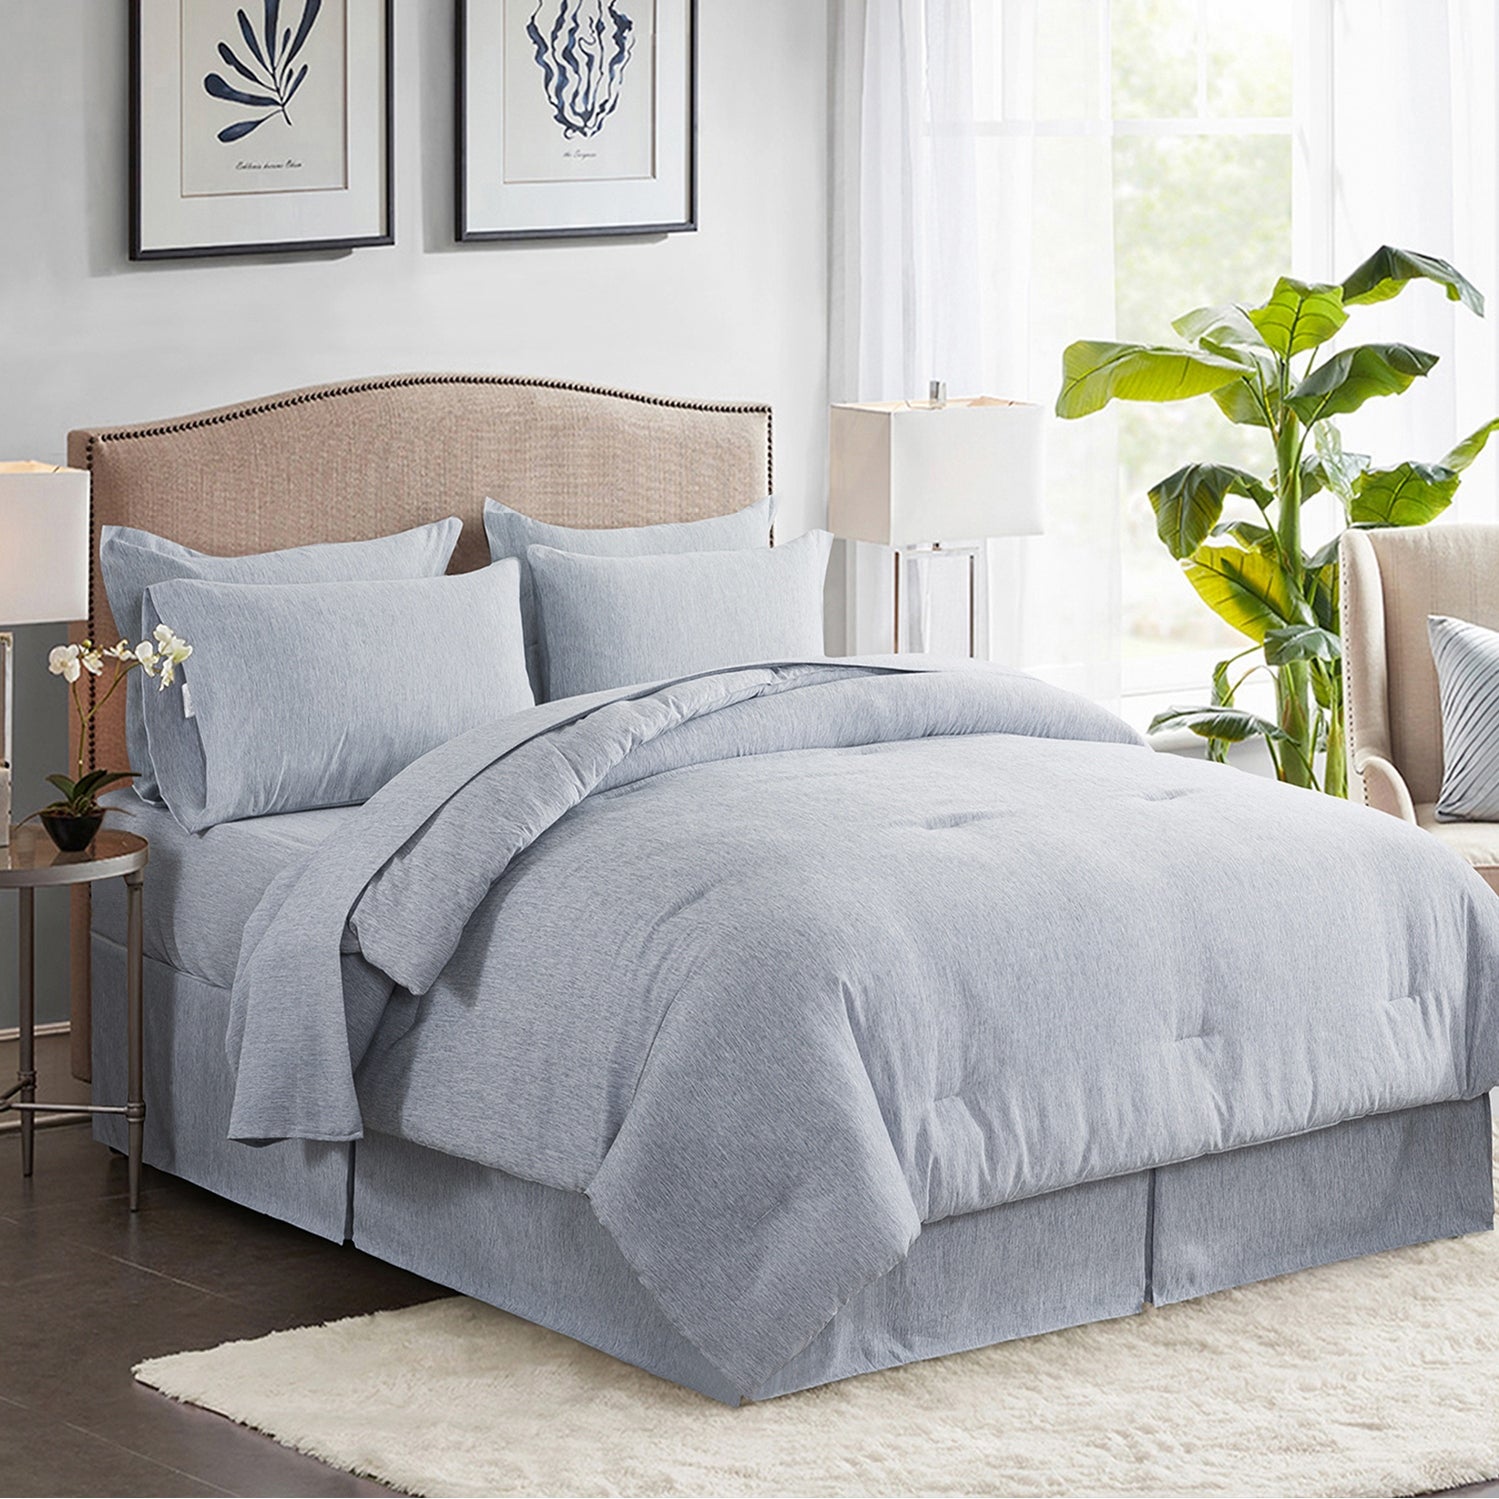 6-Piece Striped Goose Down Bed In A Bag Twin Size Comforter Set Includes:  シーツ、カバー